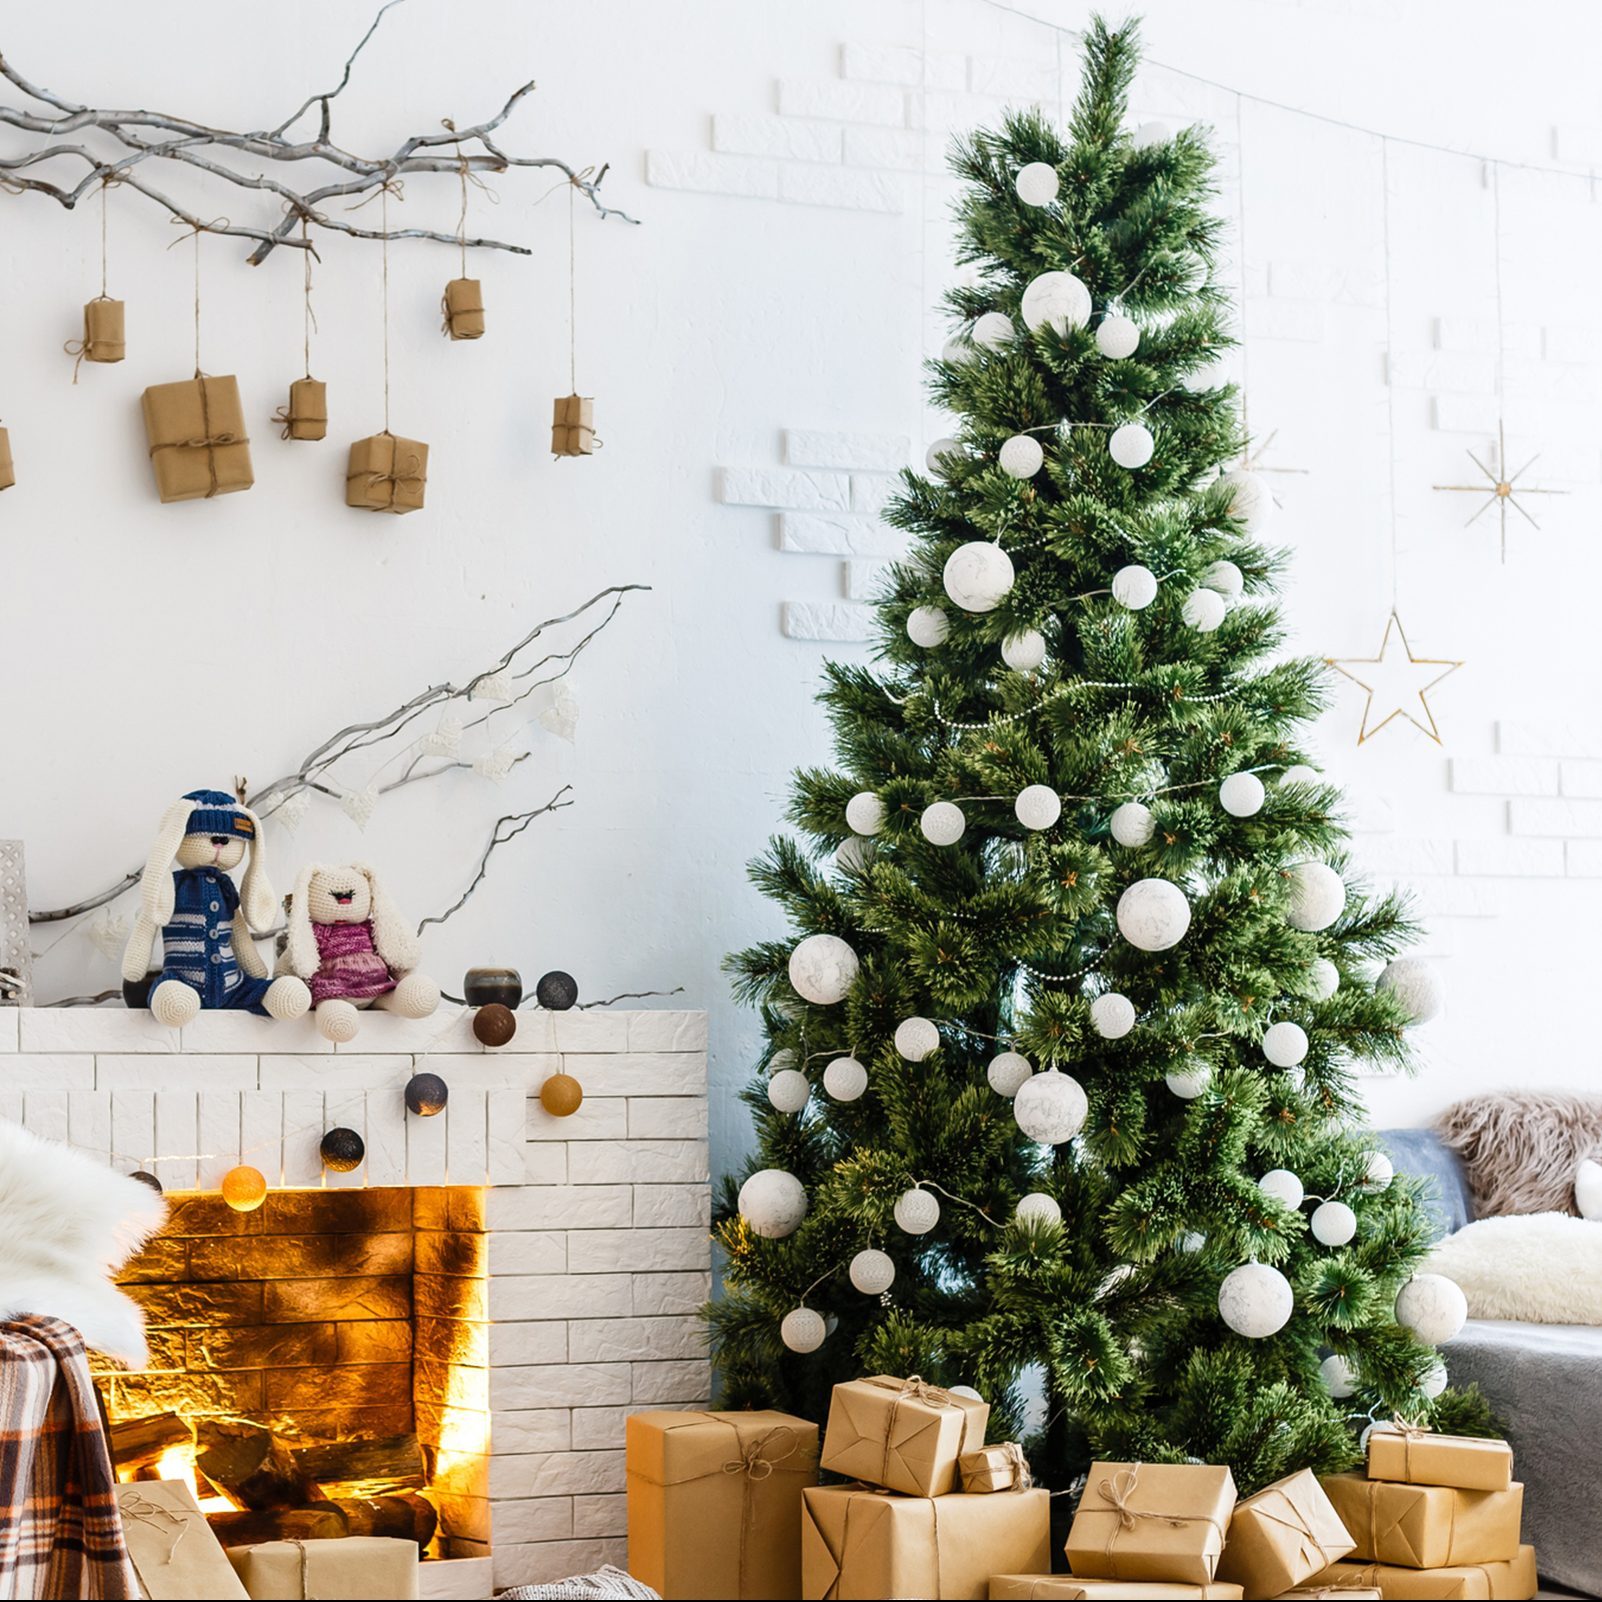 Fireplace and Christmas tree with presents in living room